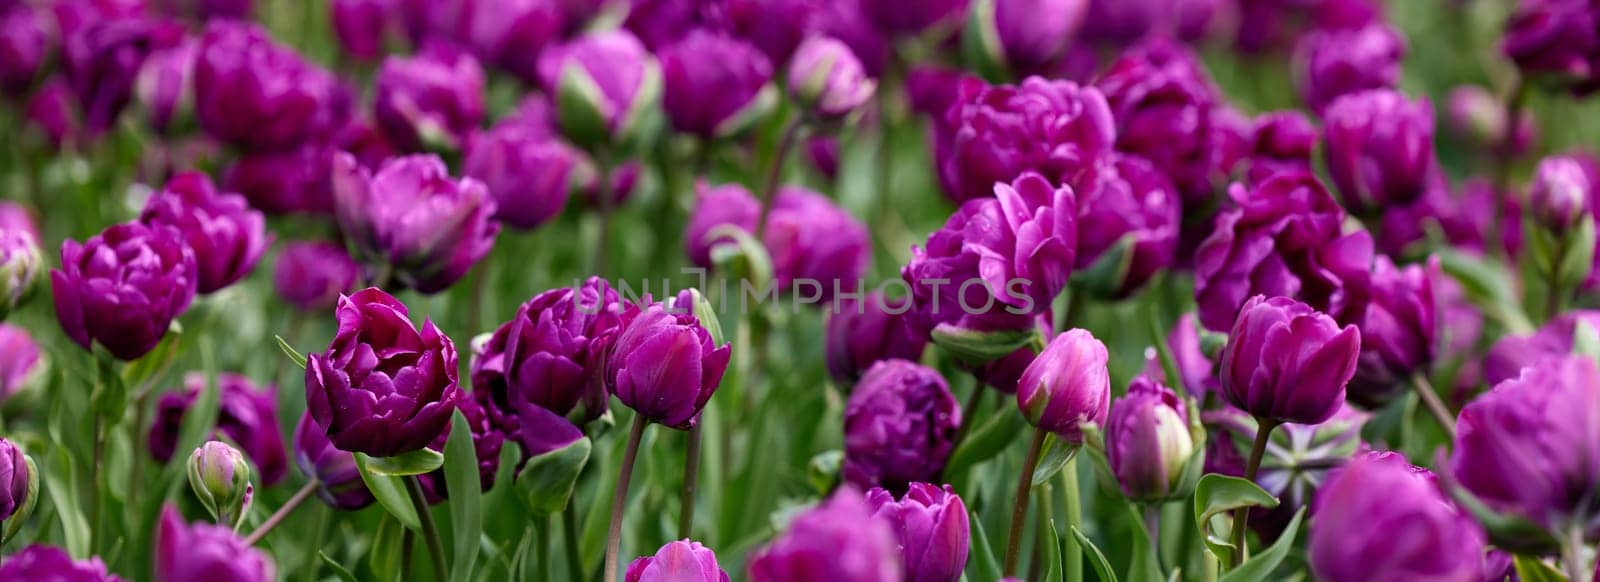 Beautiful bright colorful purple Spring tulips. Field of tulips. Tulip flowers blooming in the garden. Panning over many tulips in a field in spring. Colorful field of flowers in nature.